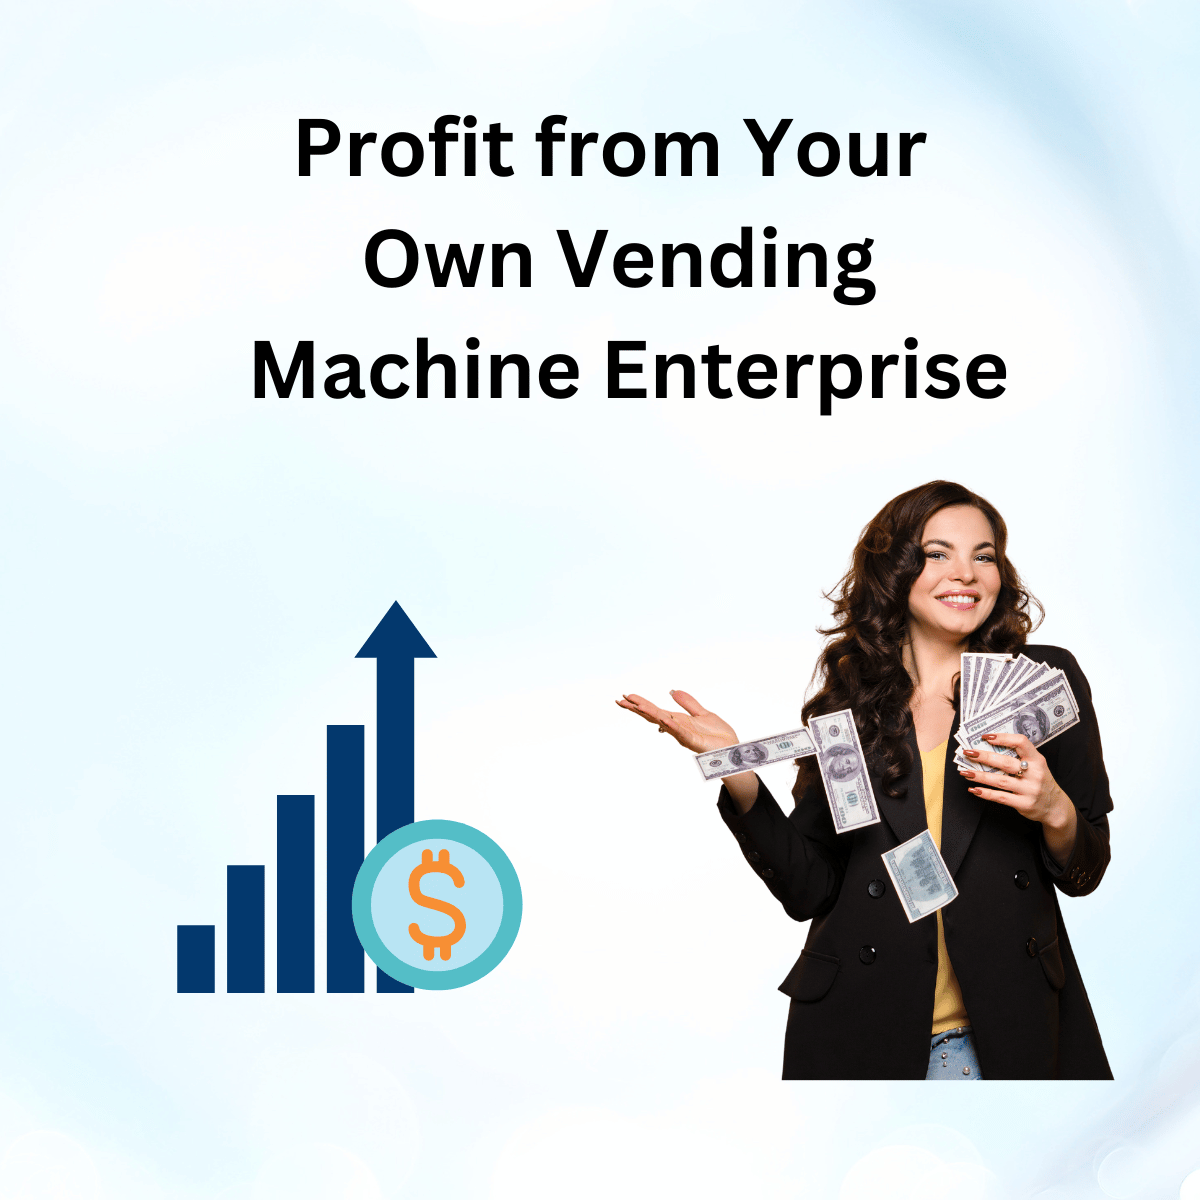 YOU CAN MAKE MONEY WITH YOUR OWN VENDING MACHINE BUSINESS